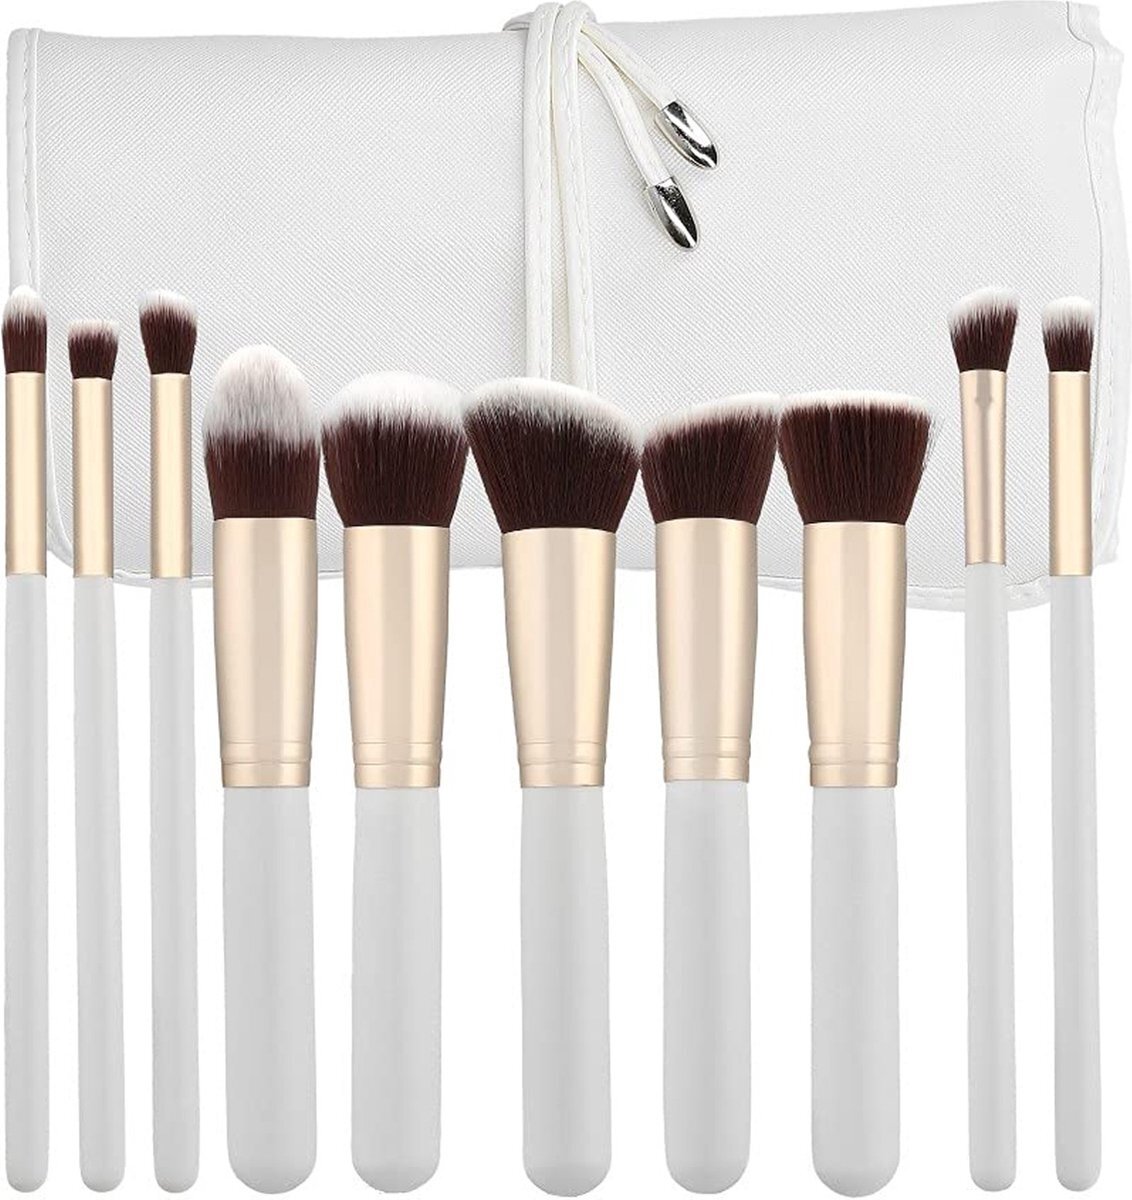 Tools For Beauty Make-Up Brush Set 10 Pieces - White